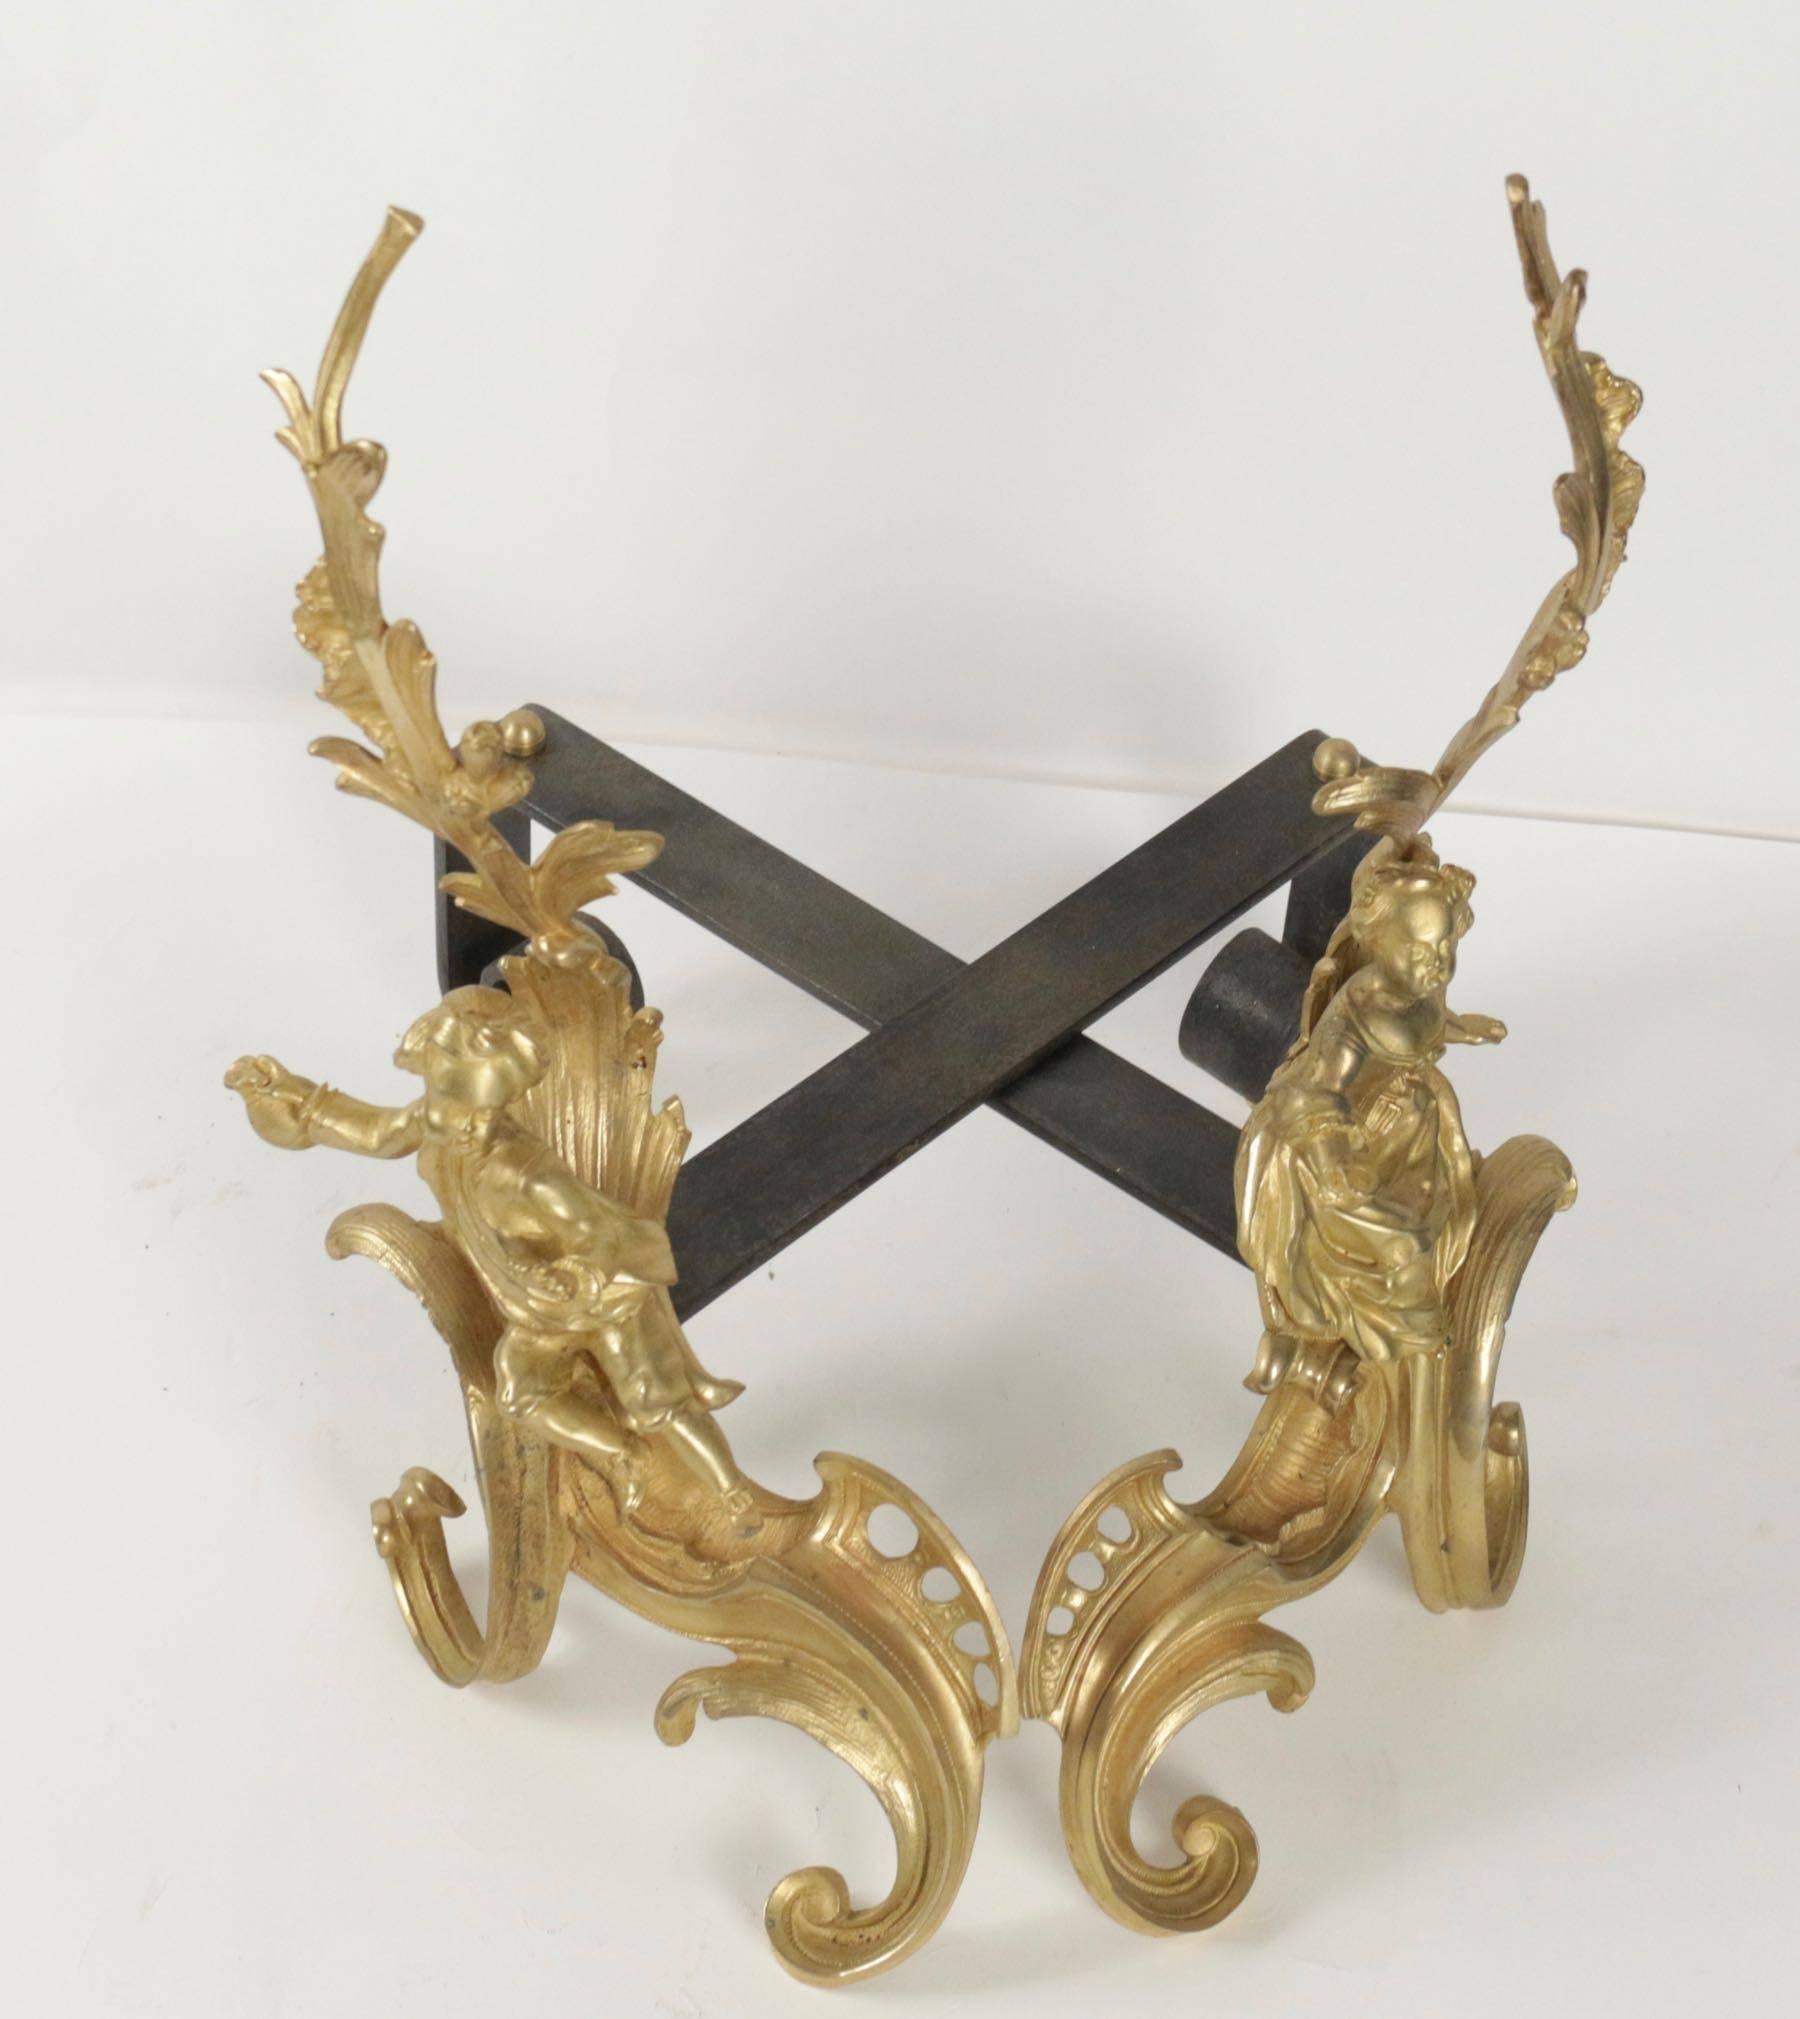 Pair of Louis XV style fireplace irons in gold gilt bronze from the 19th century representing an elegant man and woman, decoration interior design.
 